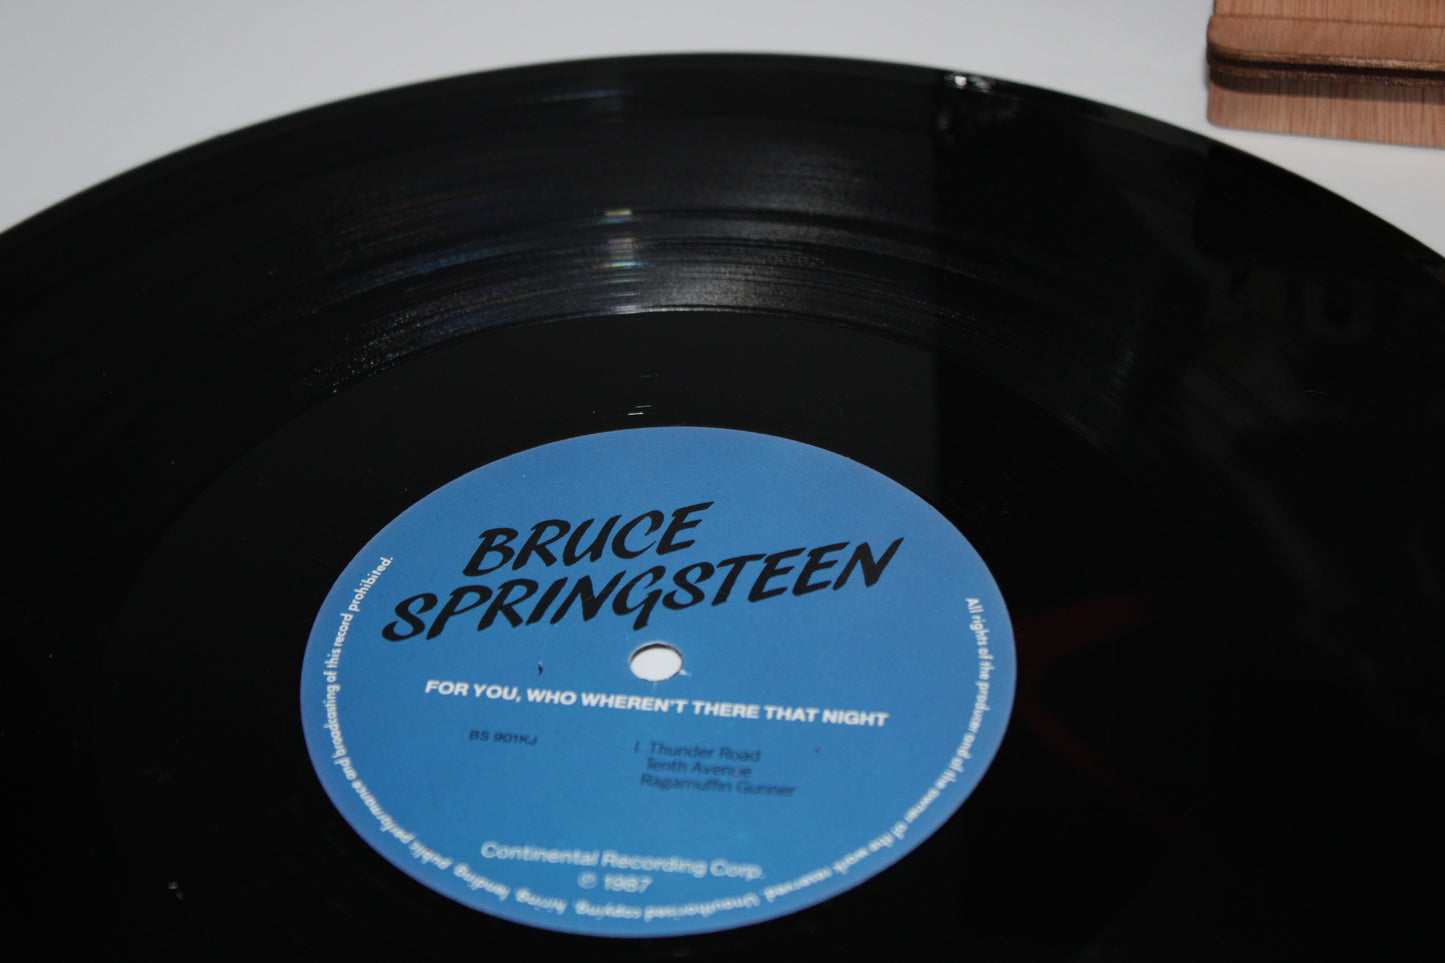 Bruce Springsteen - For You Who Weren't There That Night - 2LPs Live 1975 Amsterdam BLV